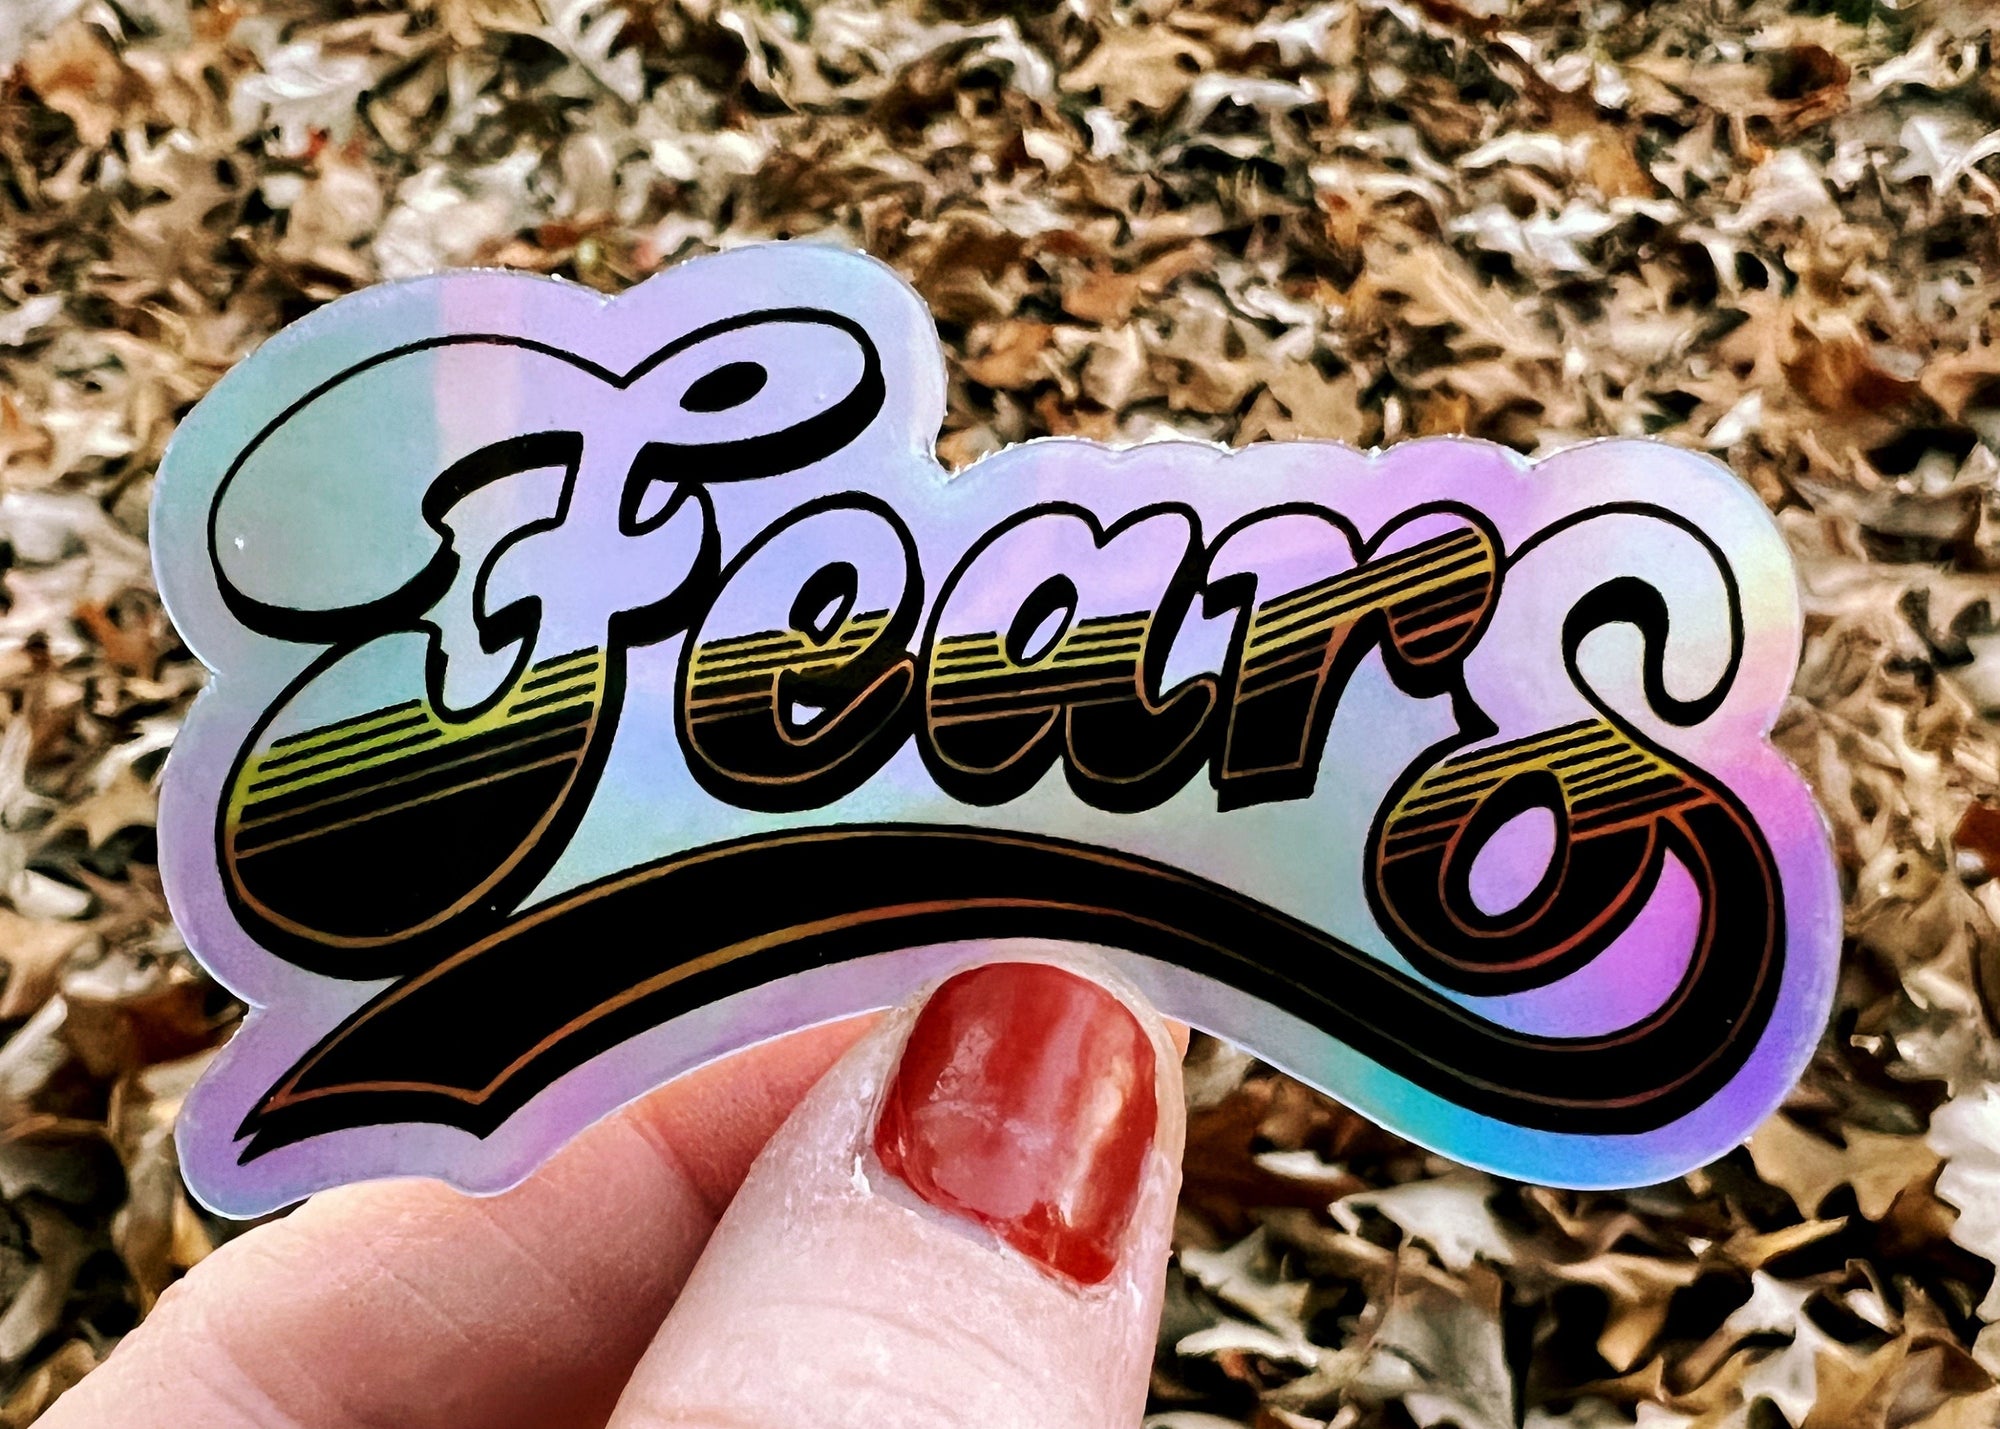 Fears x Cheers Holographic Sticker